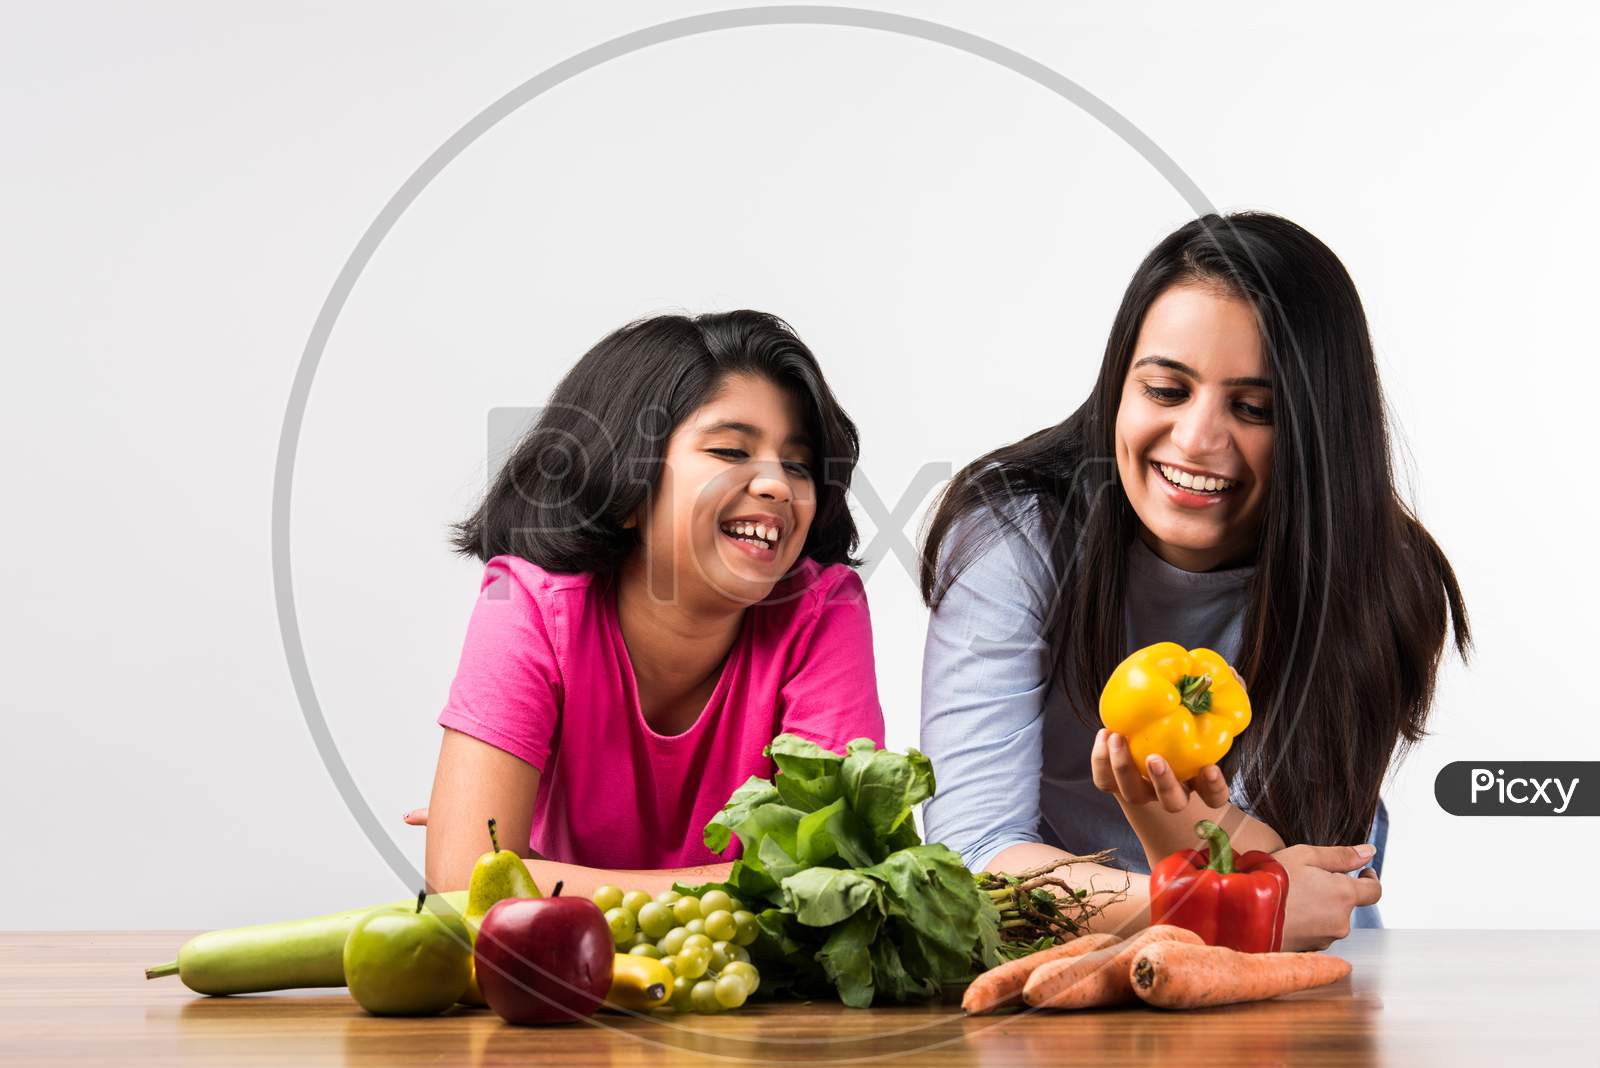 Happy Indian Family In The Kitchen. Pretty Mother & Cute Daughter Posing With Vegetables And Fruits